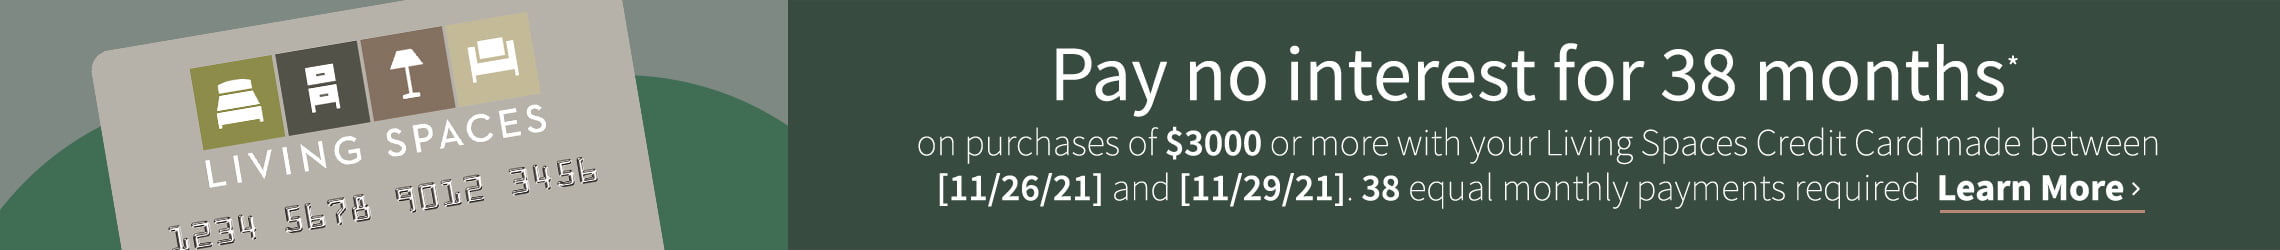 Pay no interest for 38months on purchases of $3000 or more with your Living Spaces Credit Card made between 11/26/21 and 11/29/21. 38 equal monthly payments required. Learn More